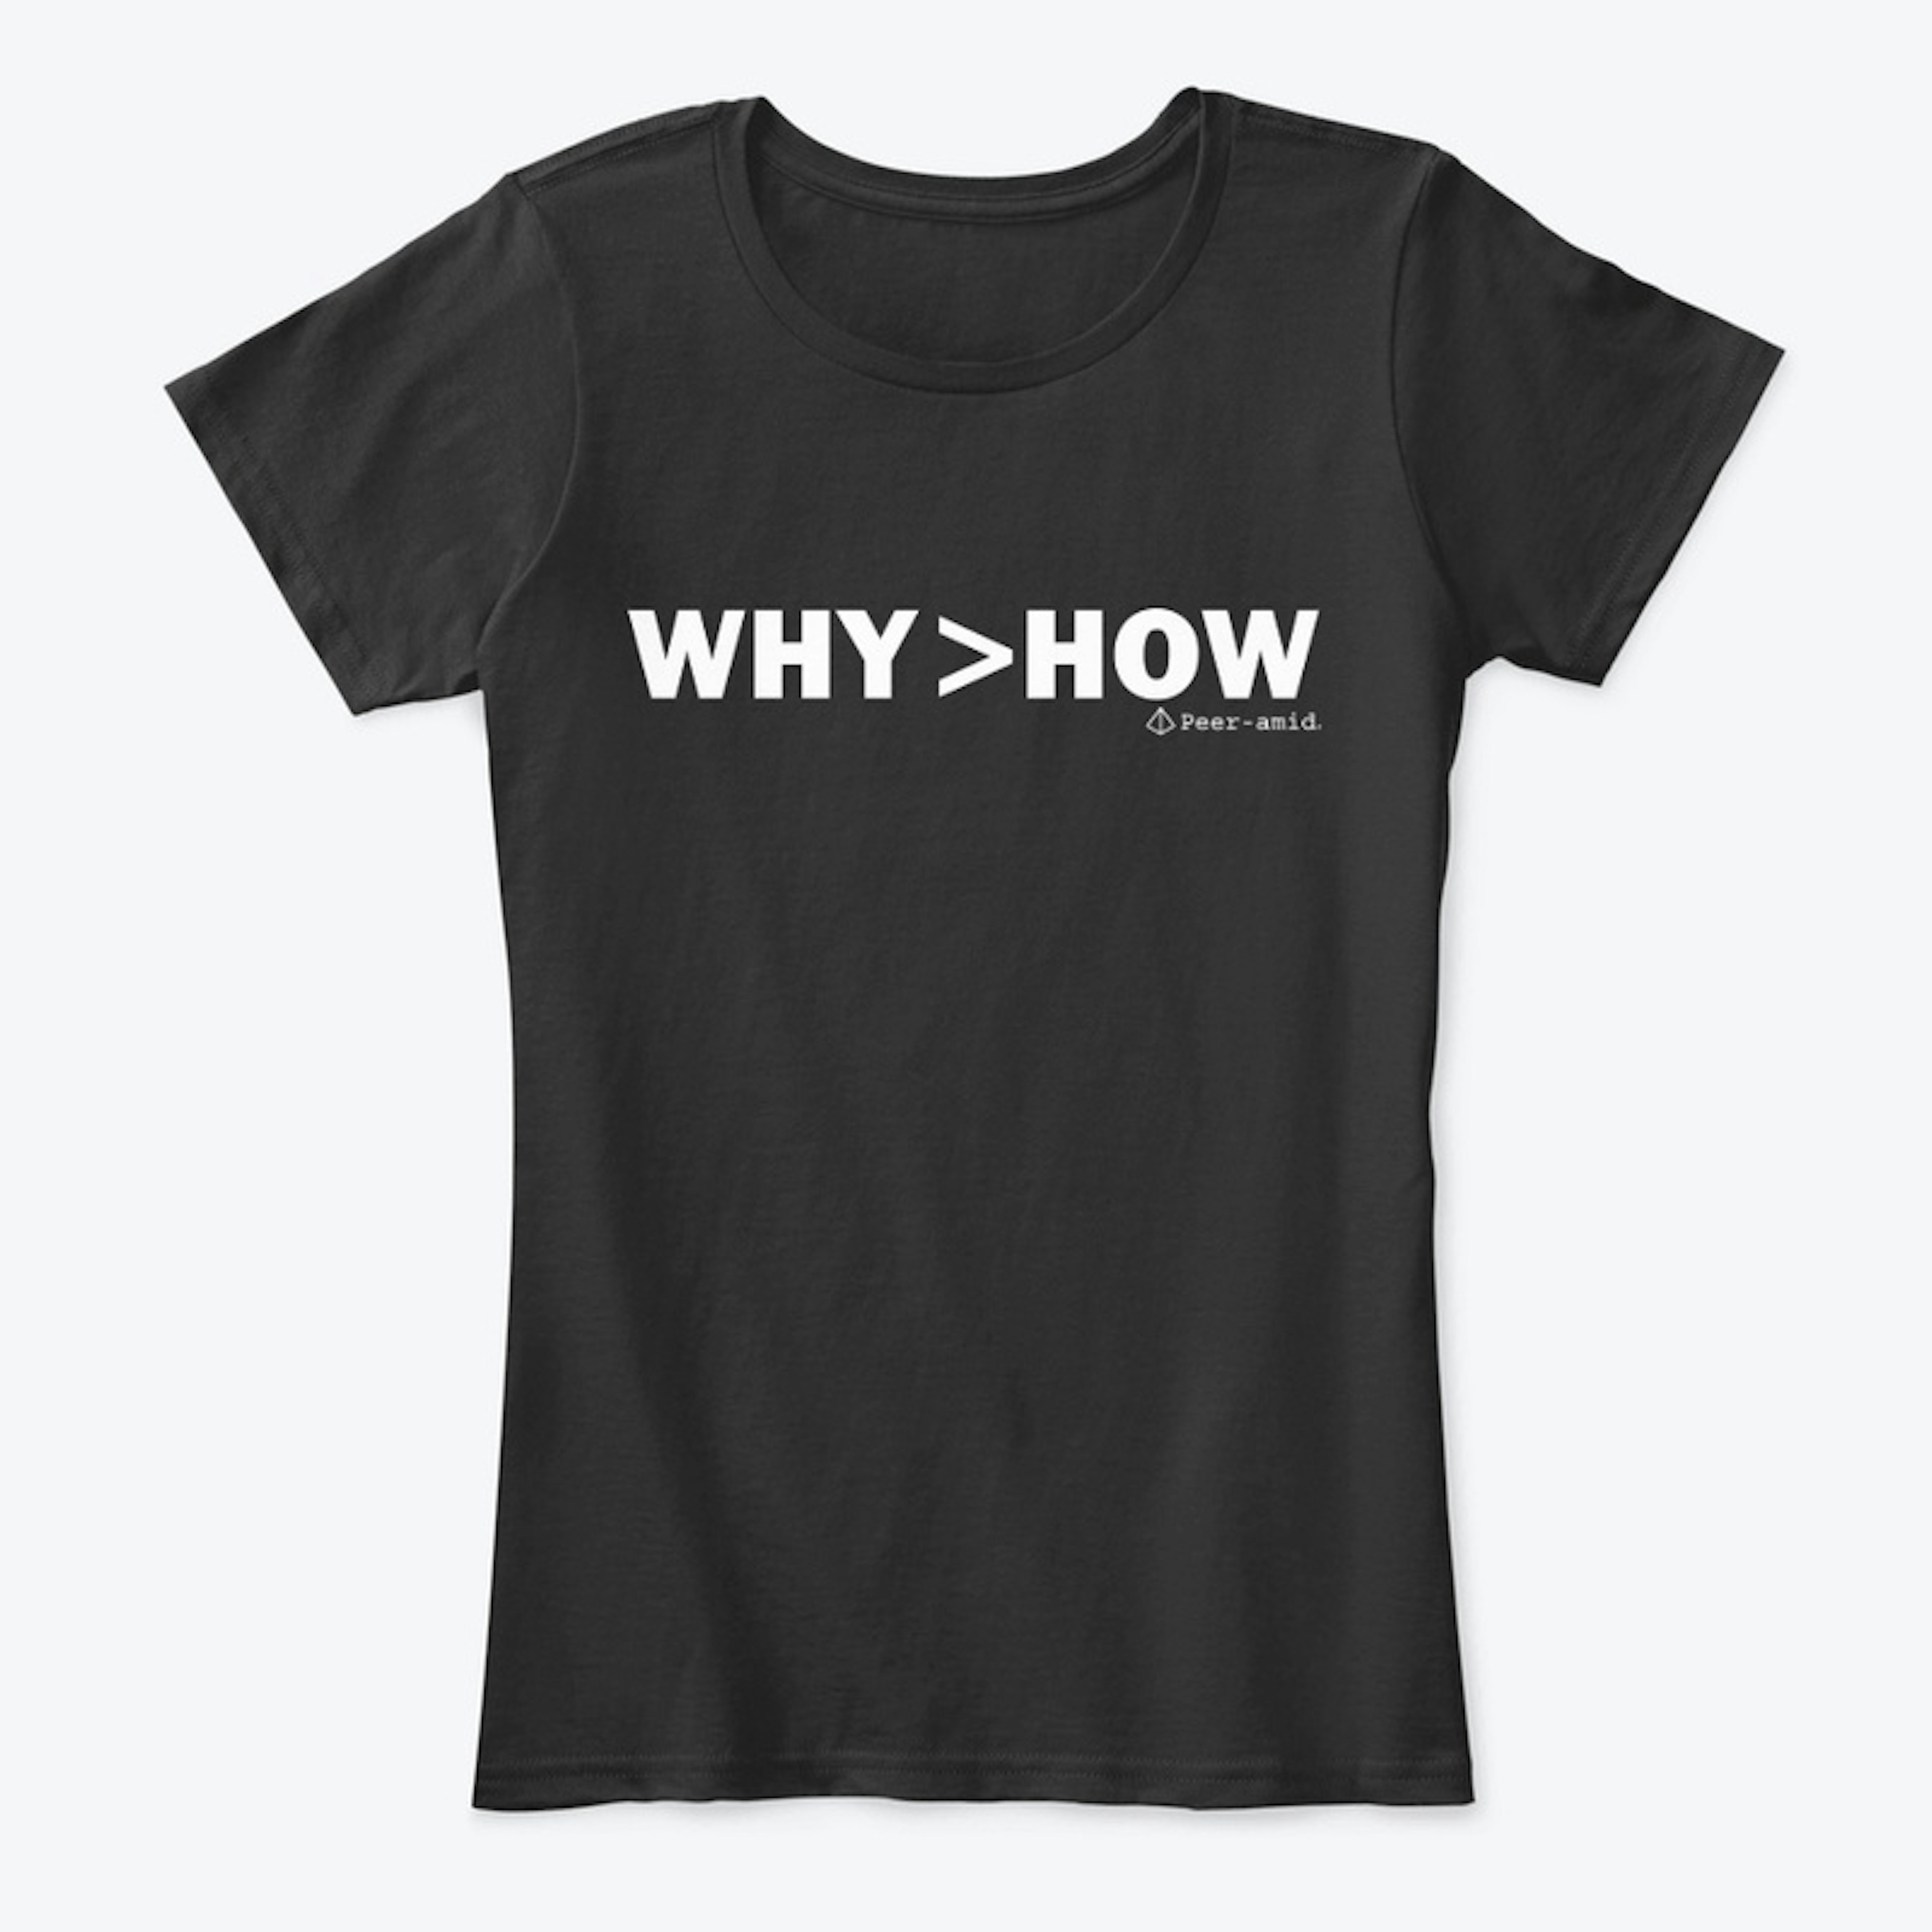 WHY IS GREATER THAN HOW (LARGE PRINT)